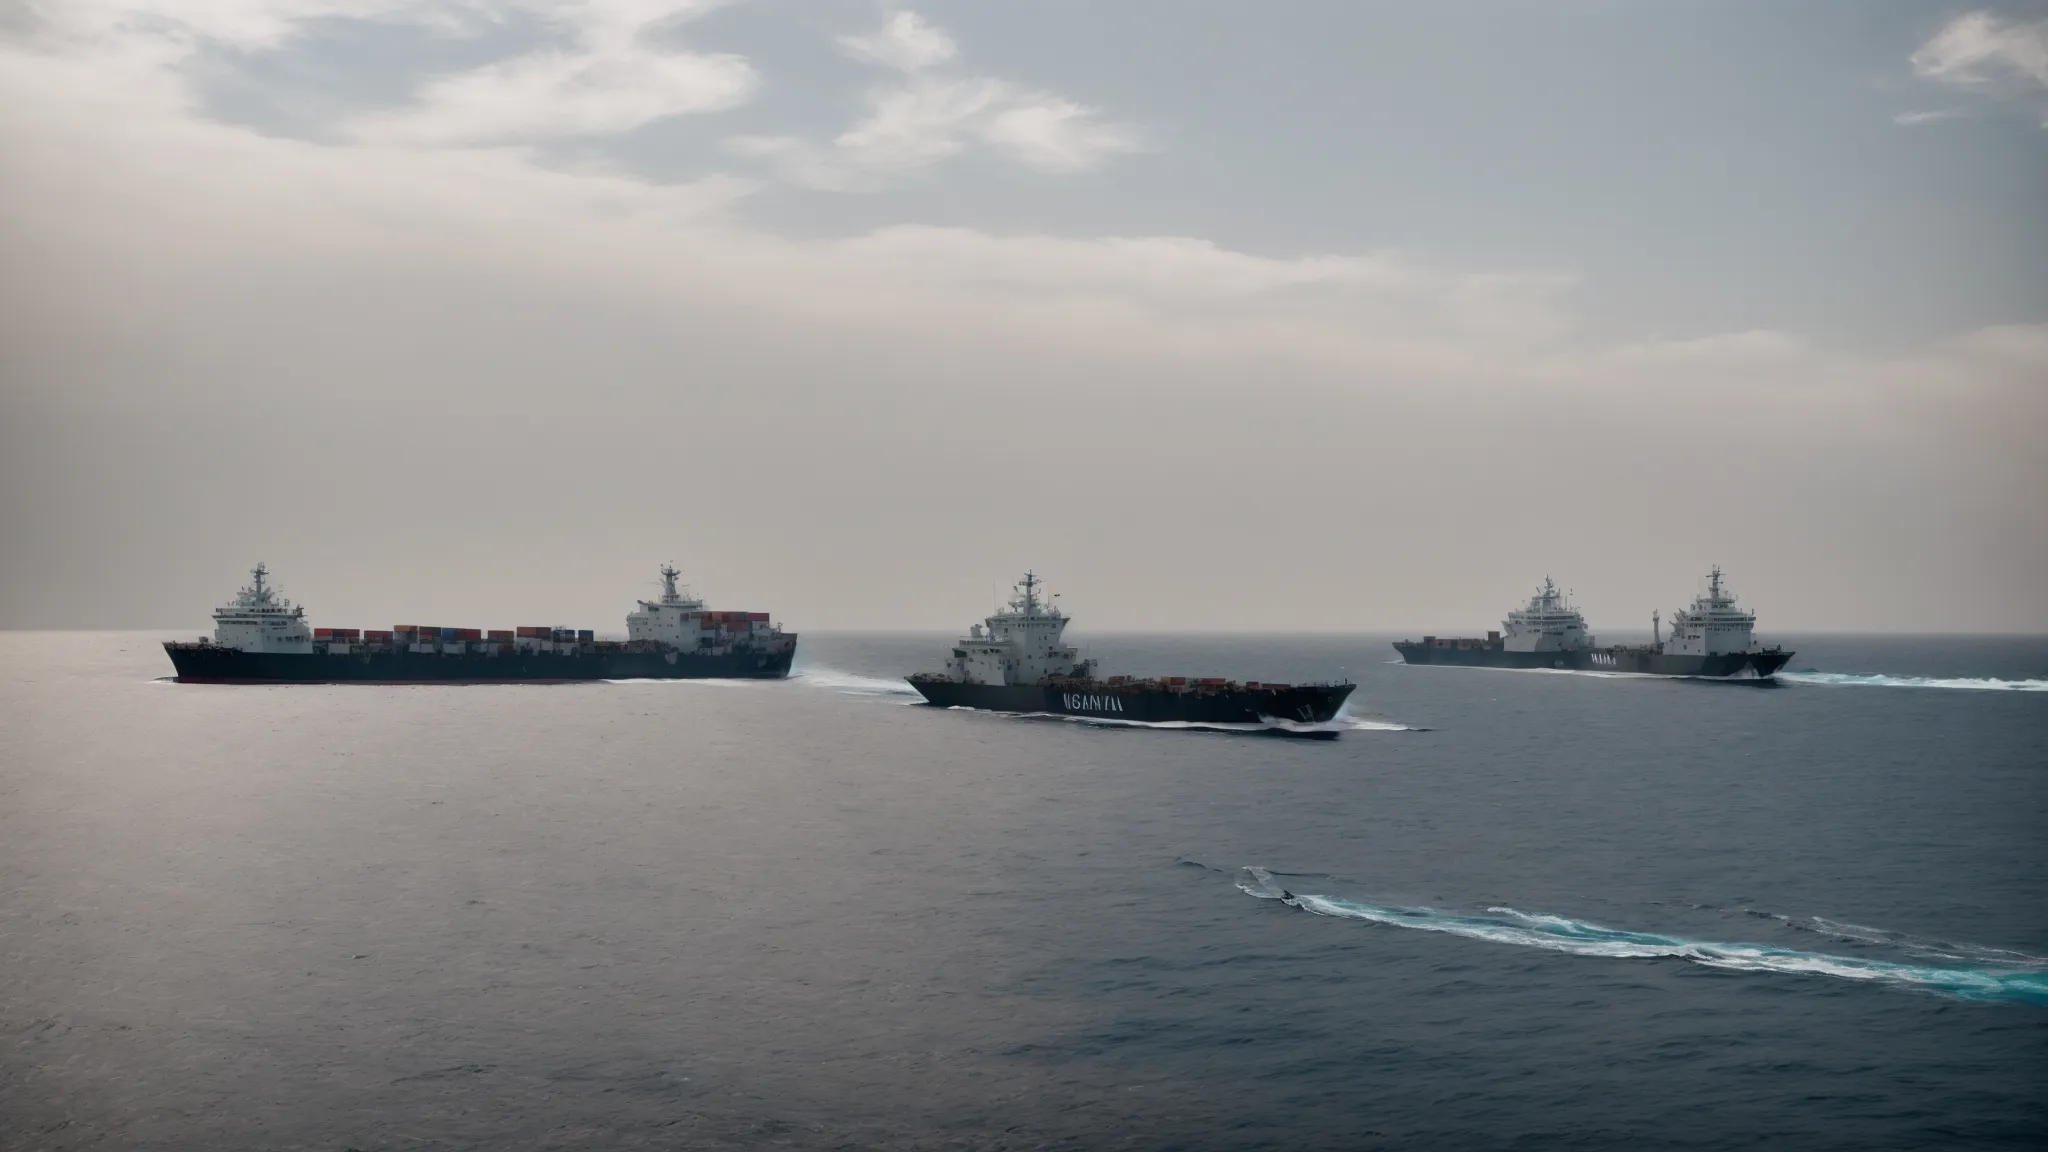 a convoy of cargo ships navigates the strategic waters of the red sea under the watchful escort of a naval patrol.